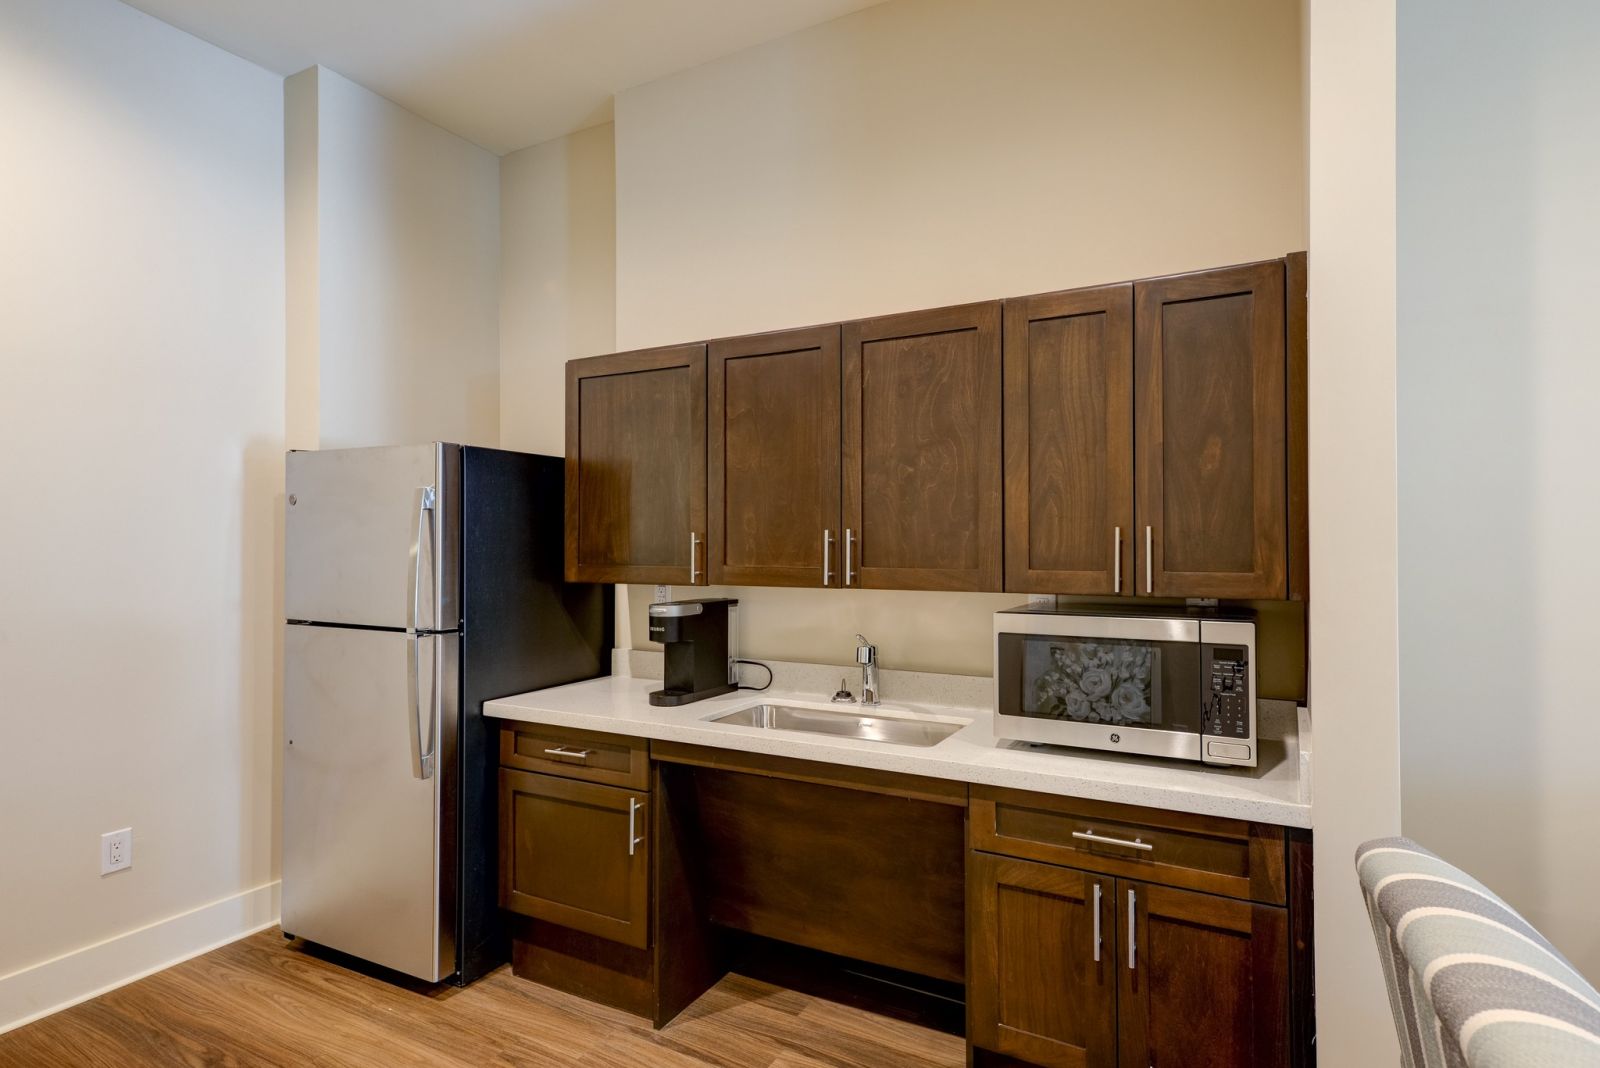 The Preserve at Meridian assisted living kitchenette showing accessibility features including sink and cabinet height